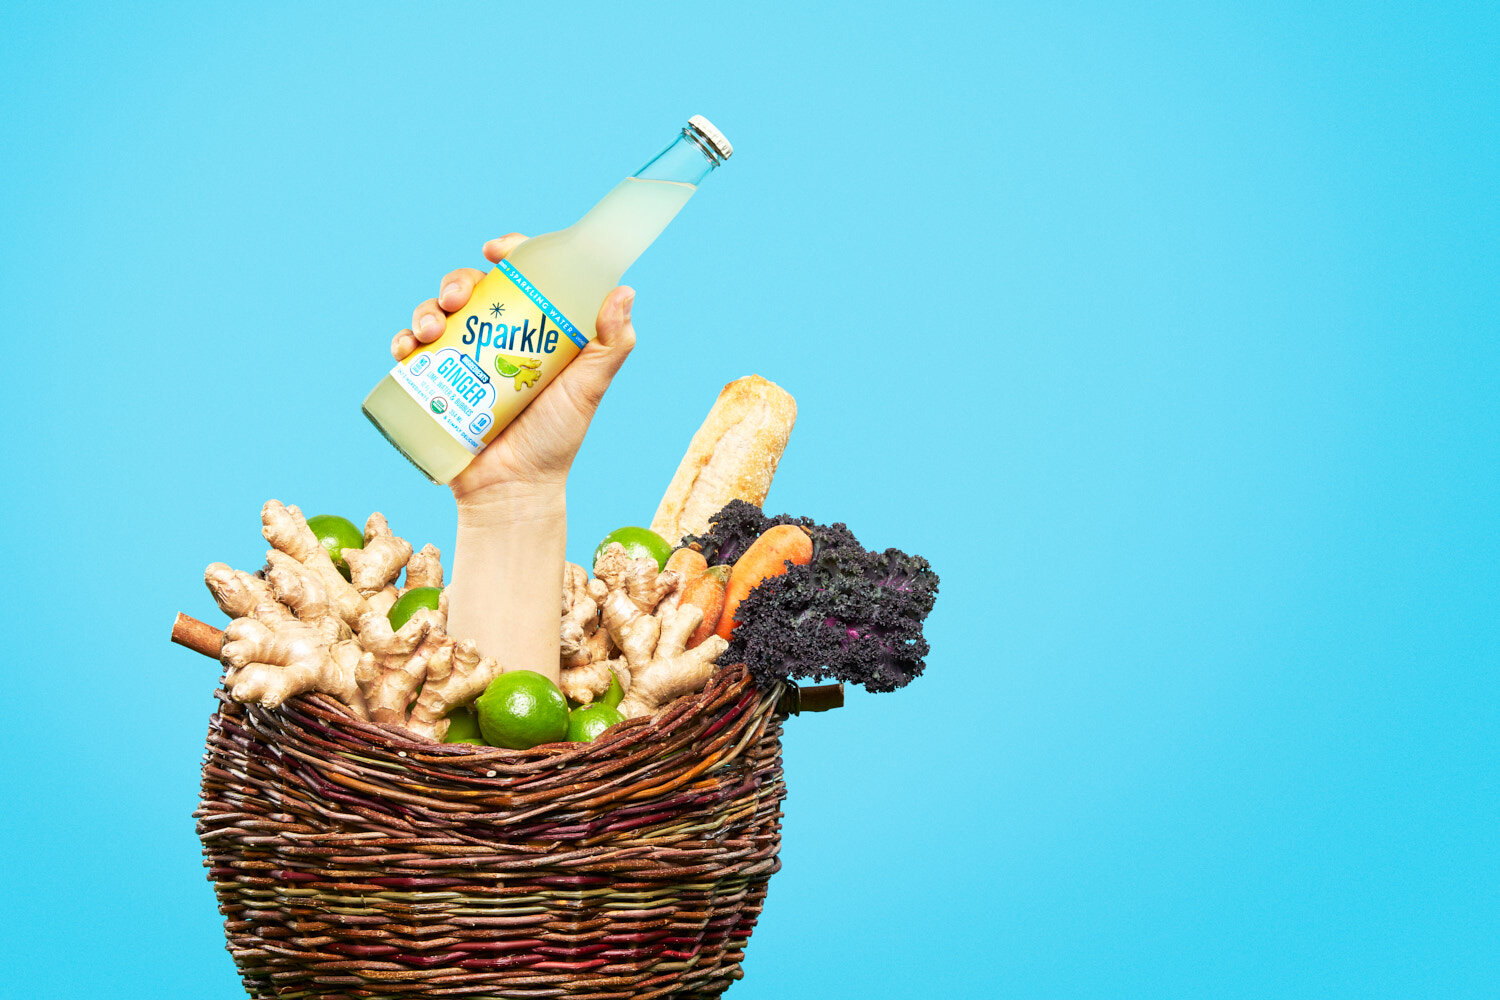 Quirky product photography: hand holding a bottle of ginger Sparkle by WiscoPop! emerges from a farmers market basket full of produce.